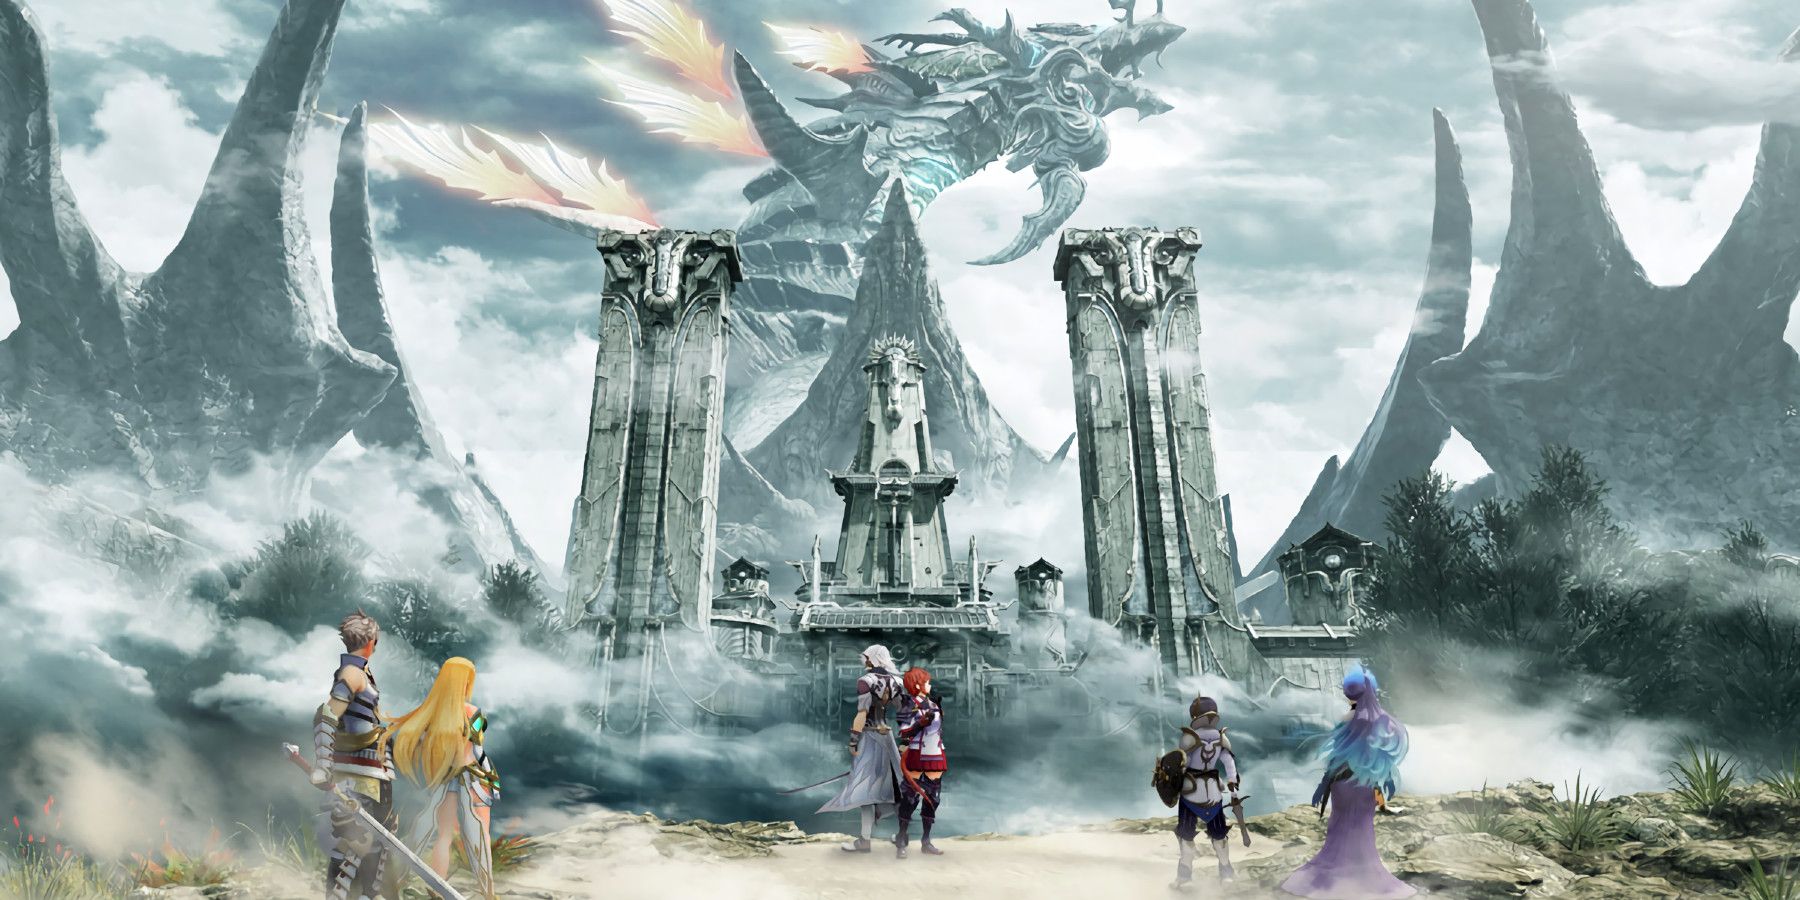 Xenoblade-Chronicles-2-Torna-The-Golden-Country-Xenoblade-Chronicles-3-Monolith-Soft-Story-DLC